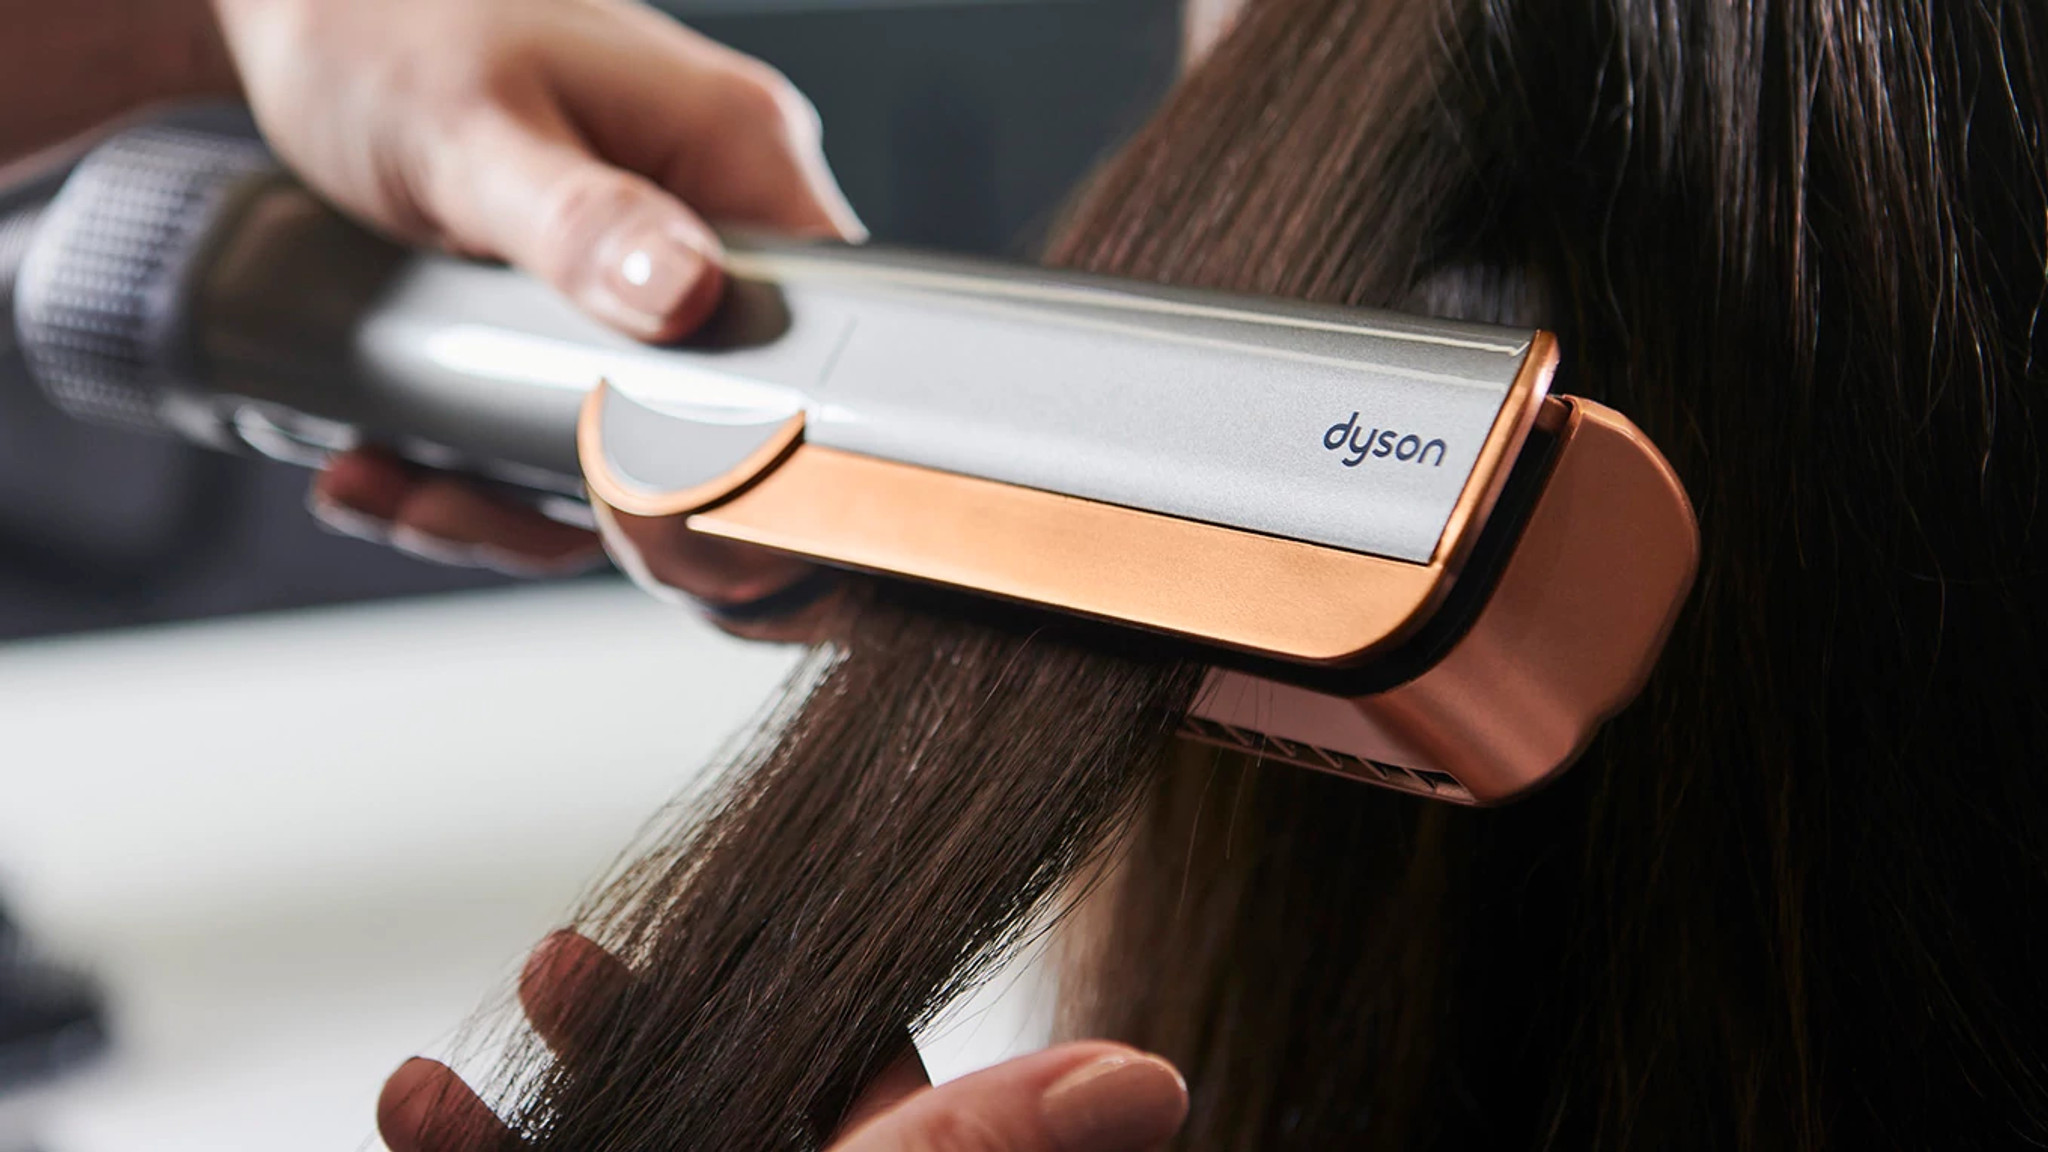 The Dyson Airstrait straightener soon to arrive in the UAE and KSA!